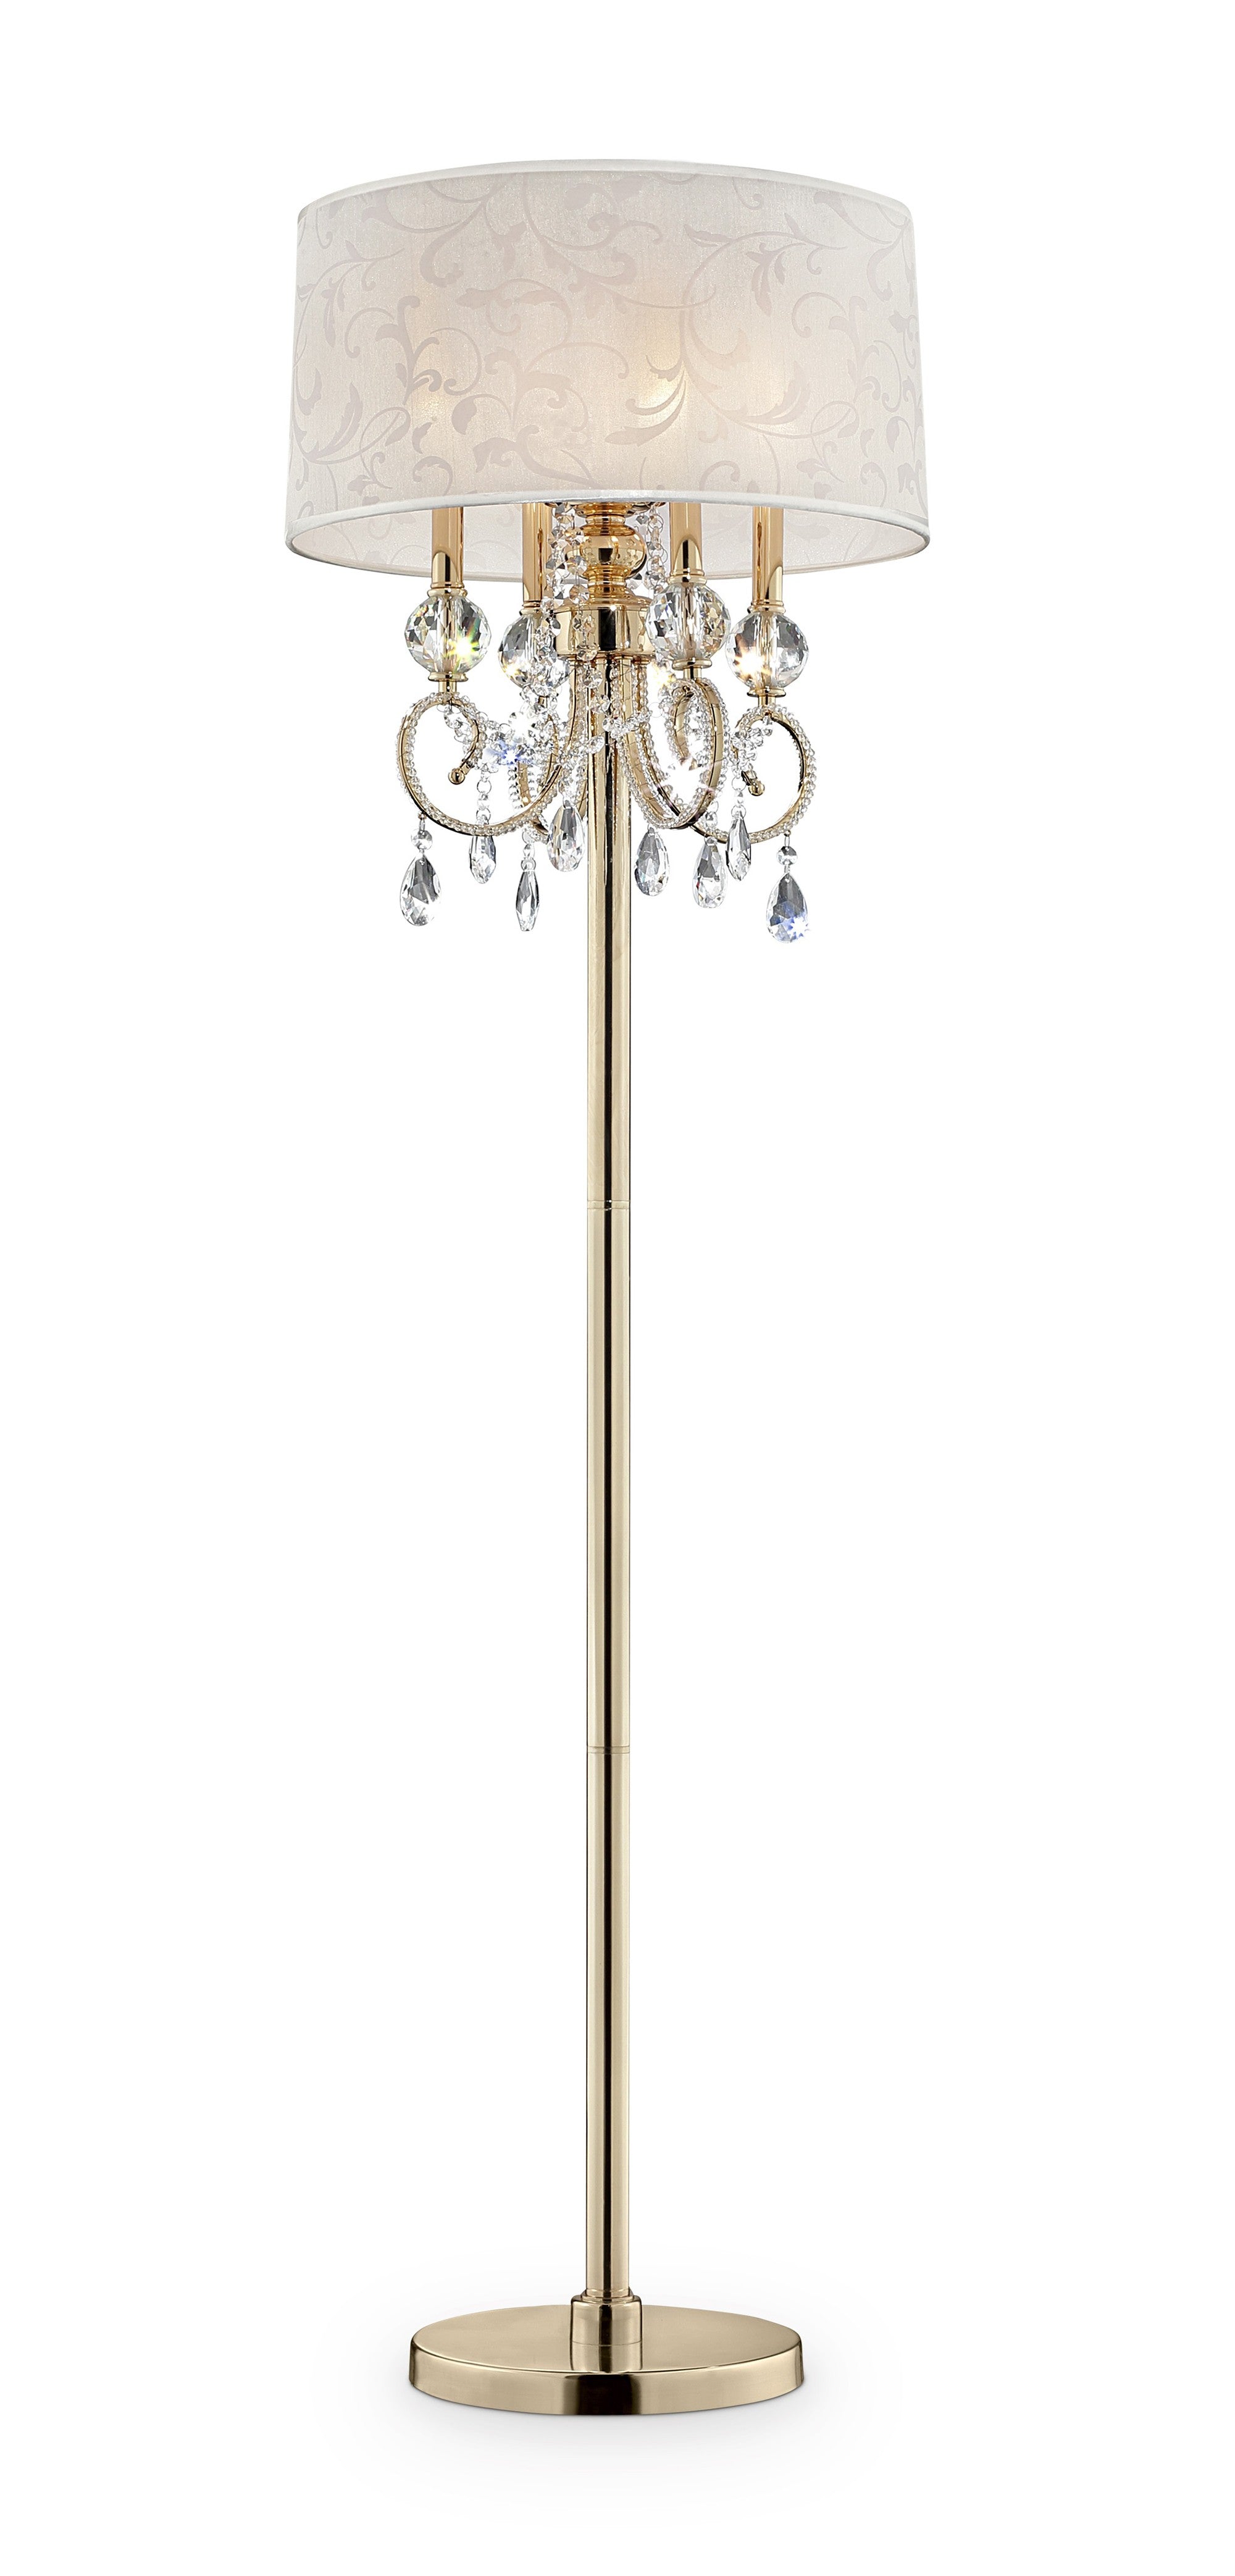 Stunning Brass Gold Finish Floor Lamp with Crystal Accents